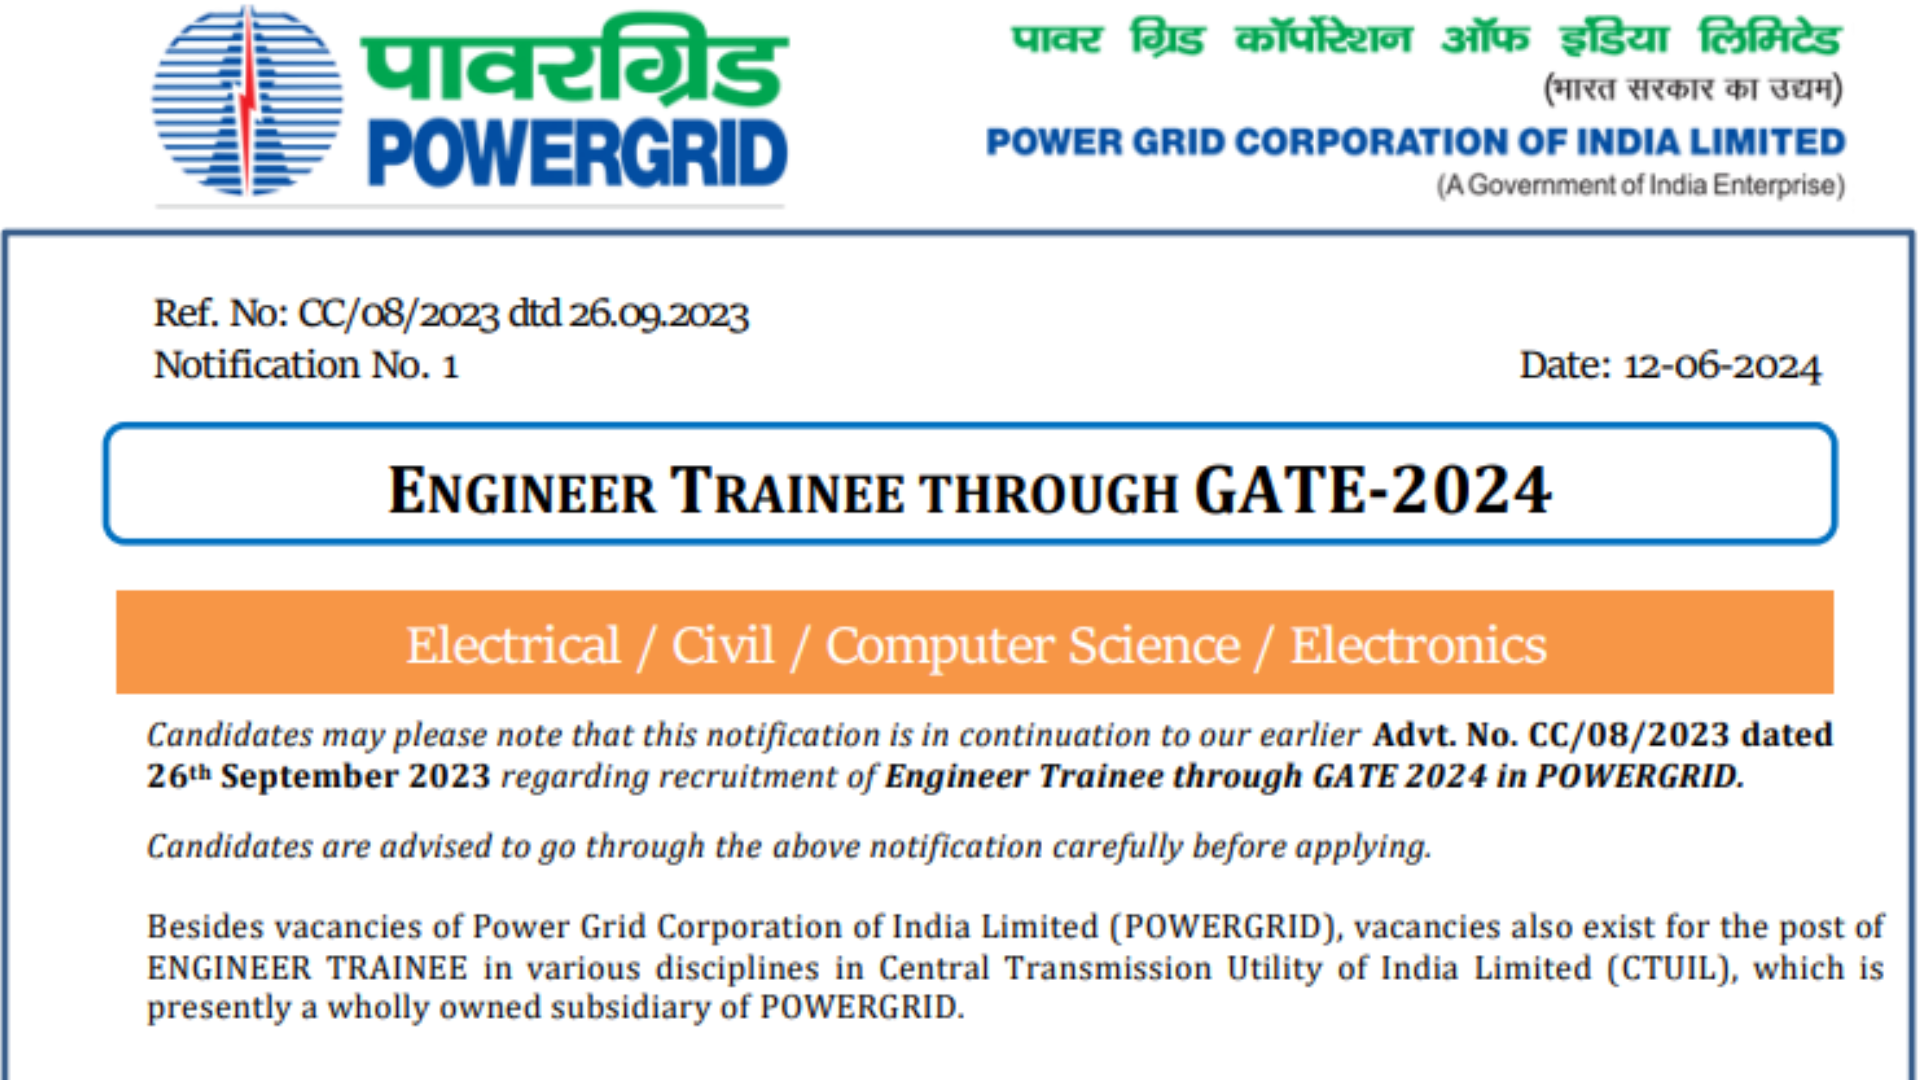 PGCIL Engineer Trainee (ET) Recruitment 2024 [381 Post] Notification and Online Form through GATE